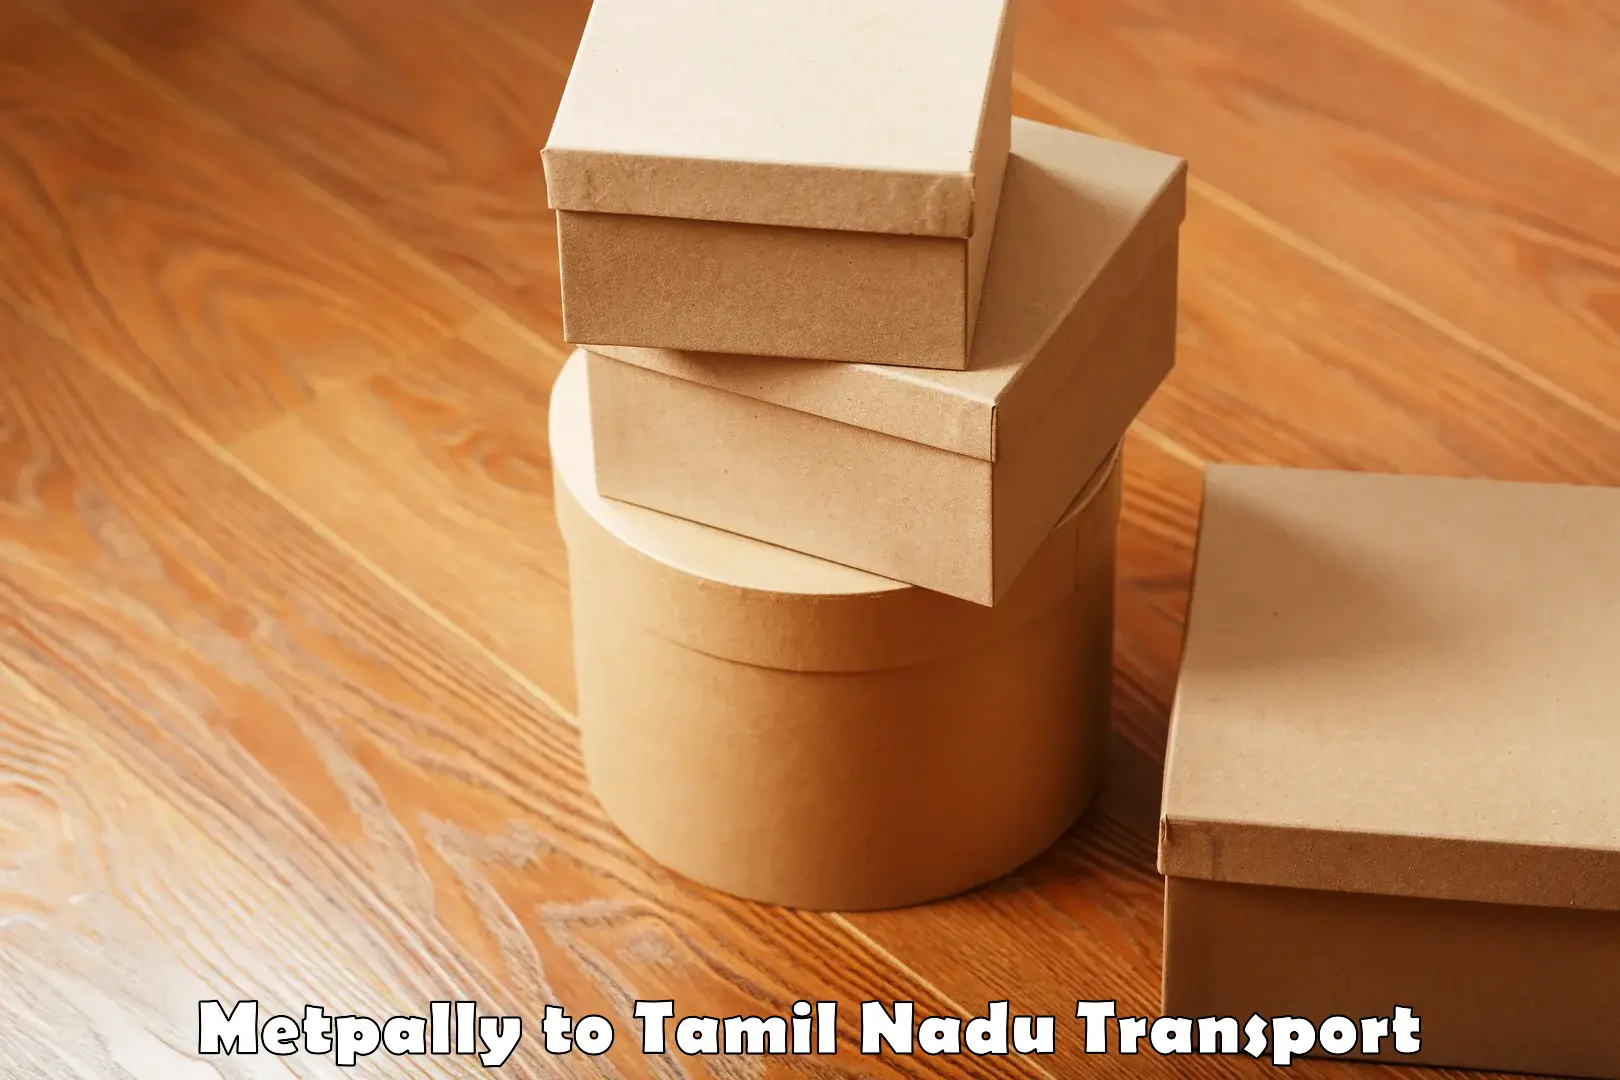 Transport shared services Metpally to Tamil Nadu